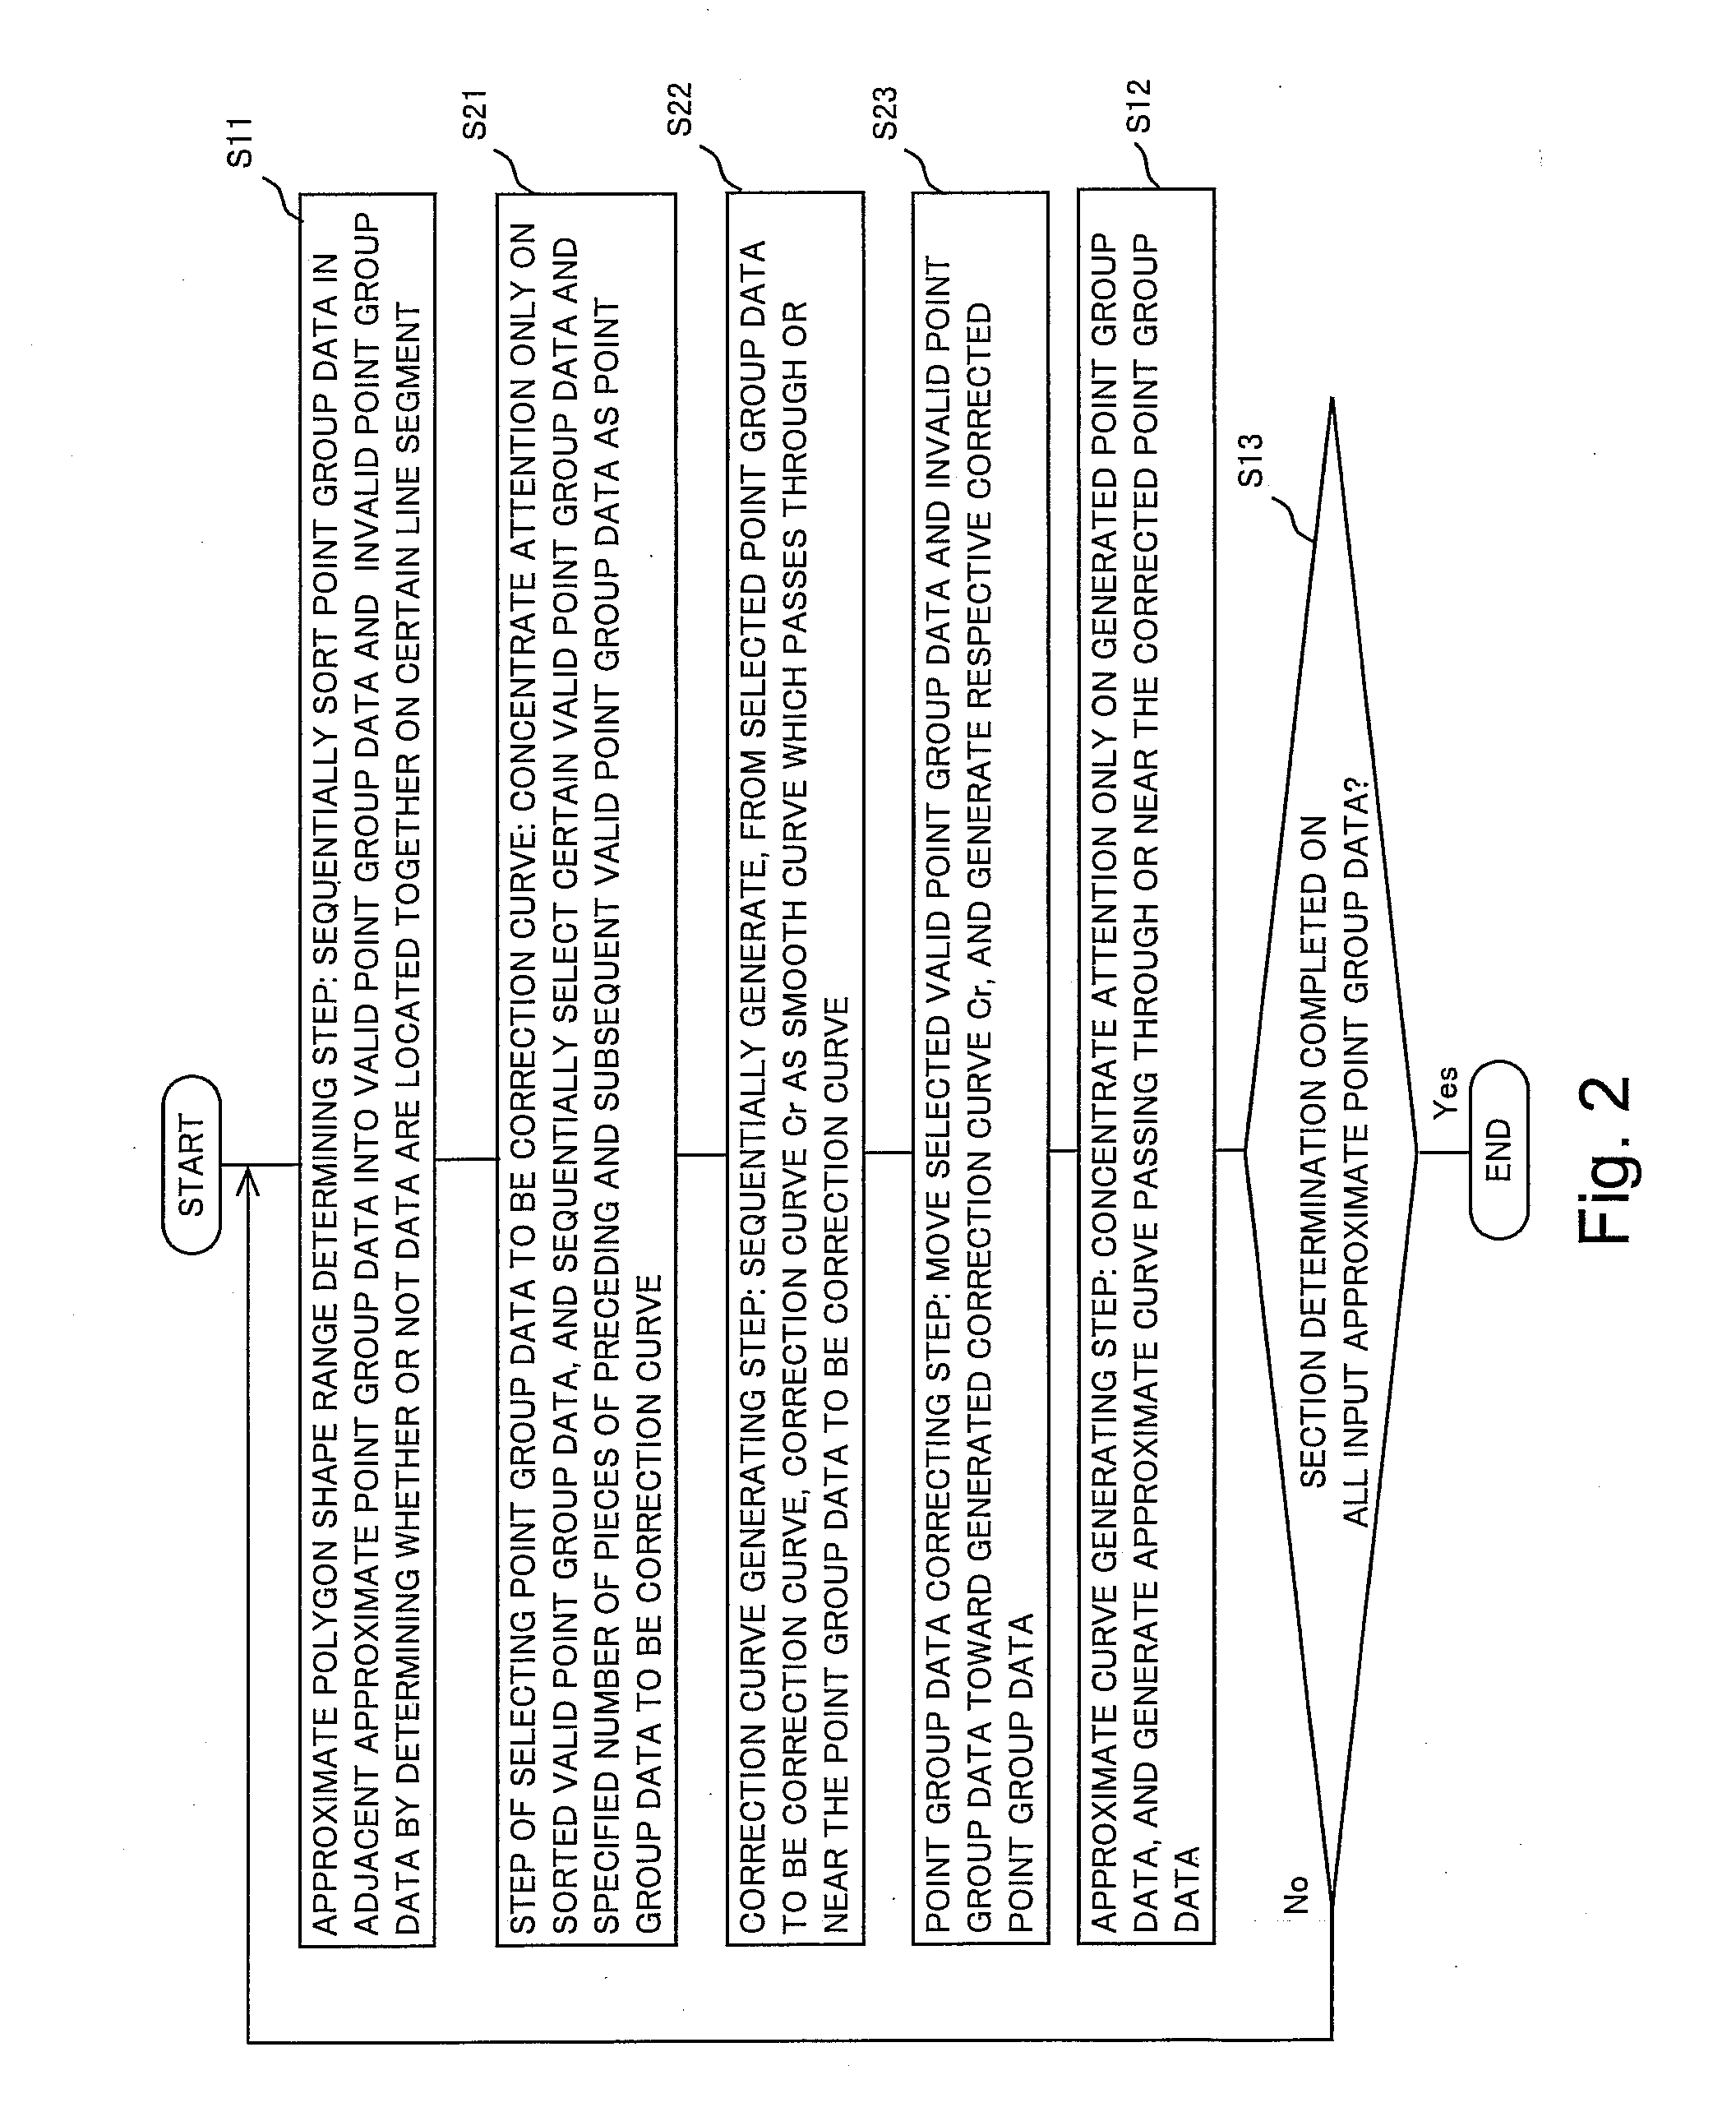 Program and method for generating approximate curve from approximate point group data